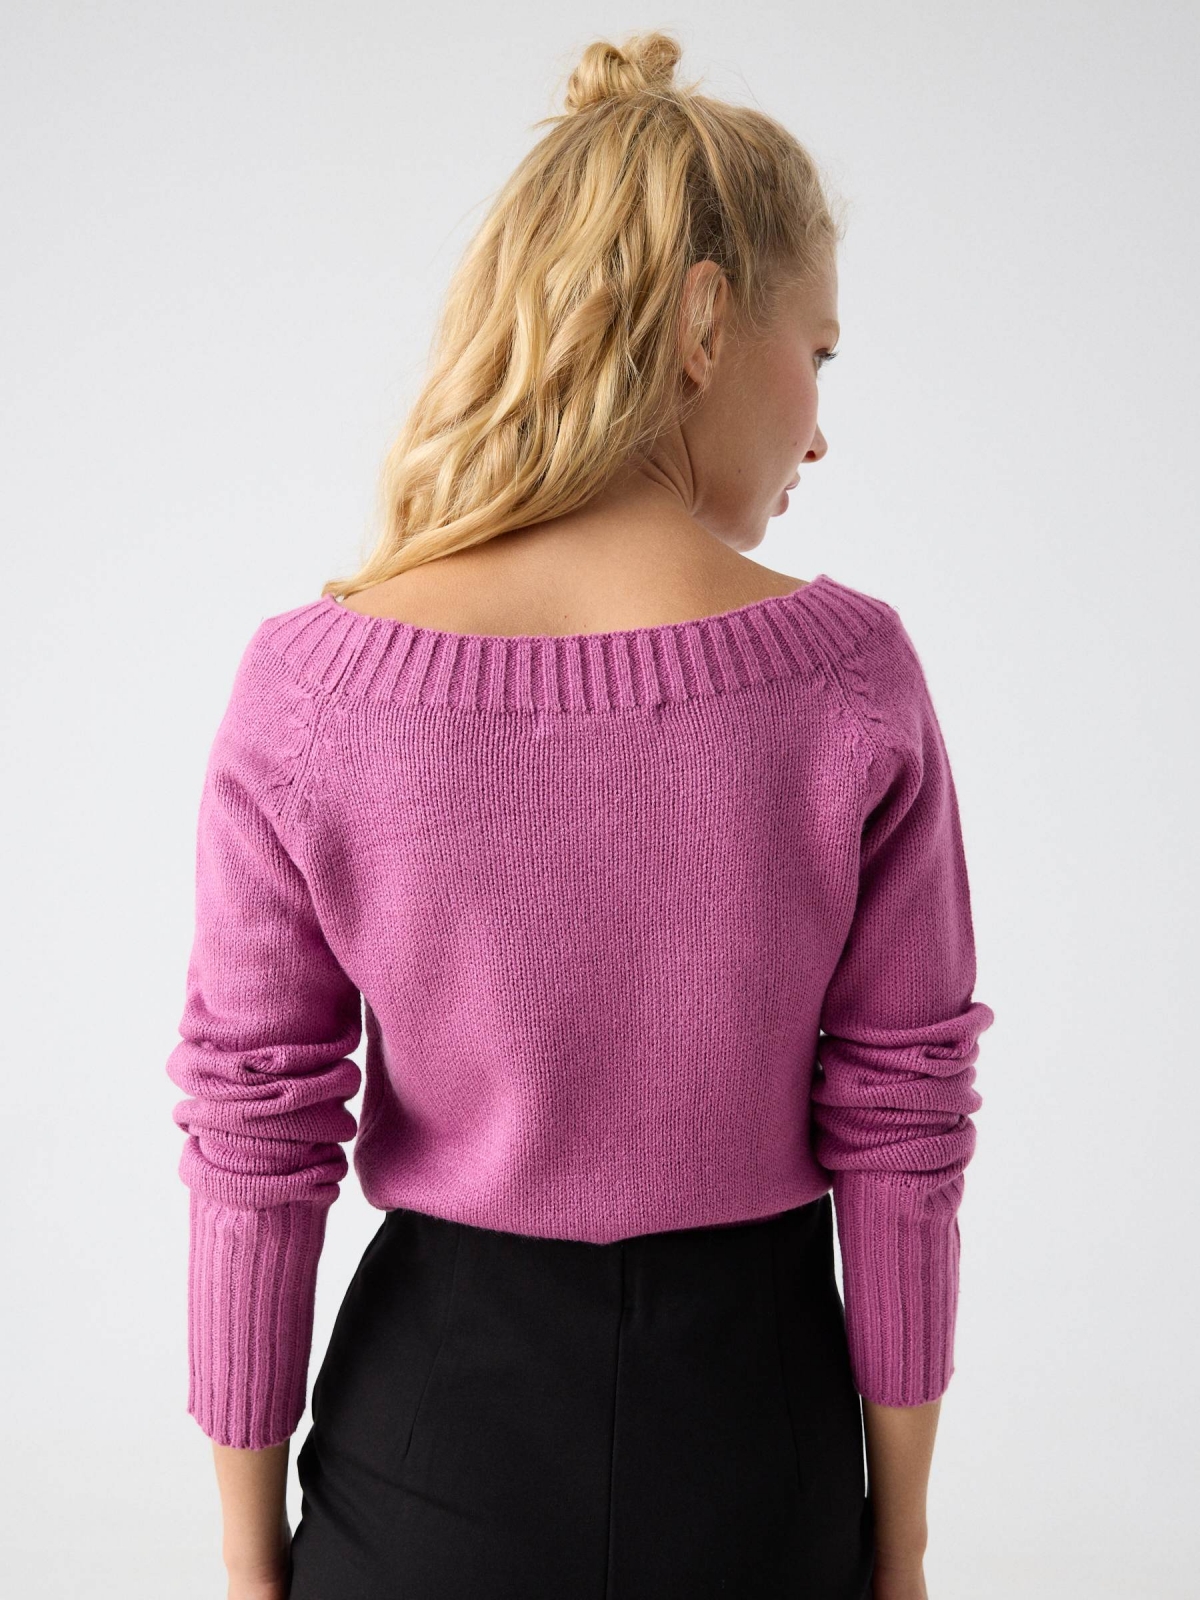 Marbled boat sweater purple middle back view